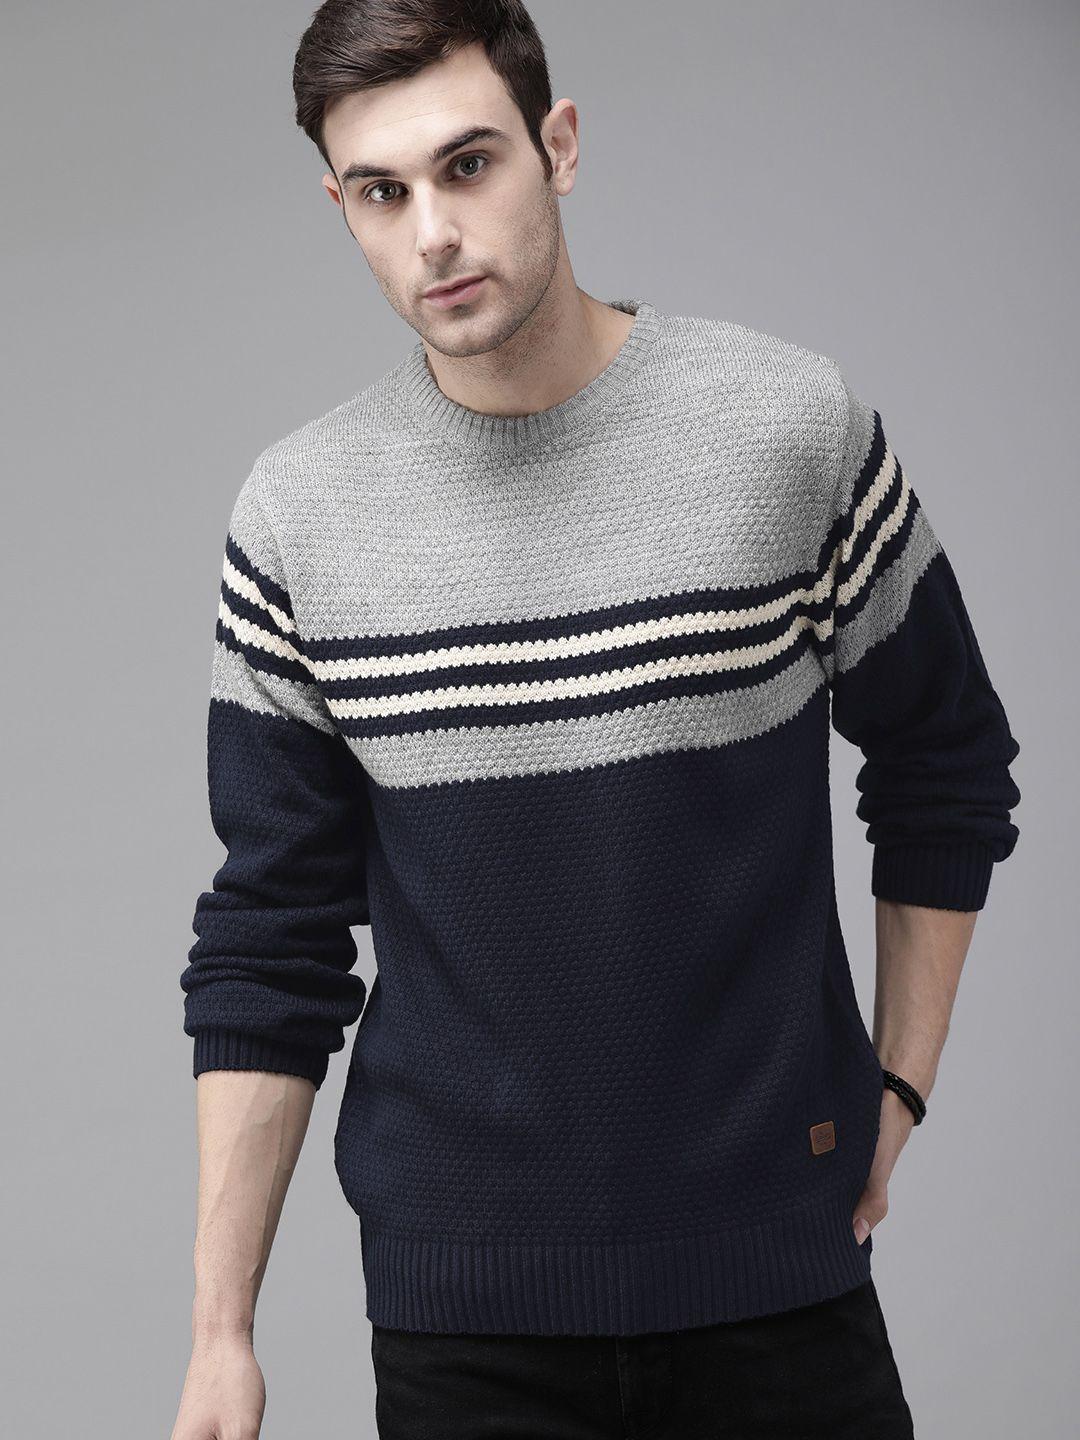 the roadster lifestyle co men grey & navy blue colourblocked pullover sweater